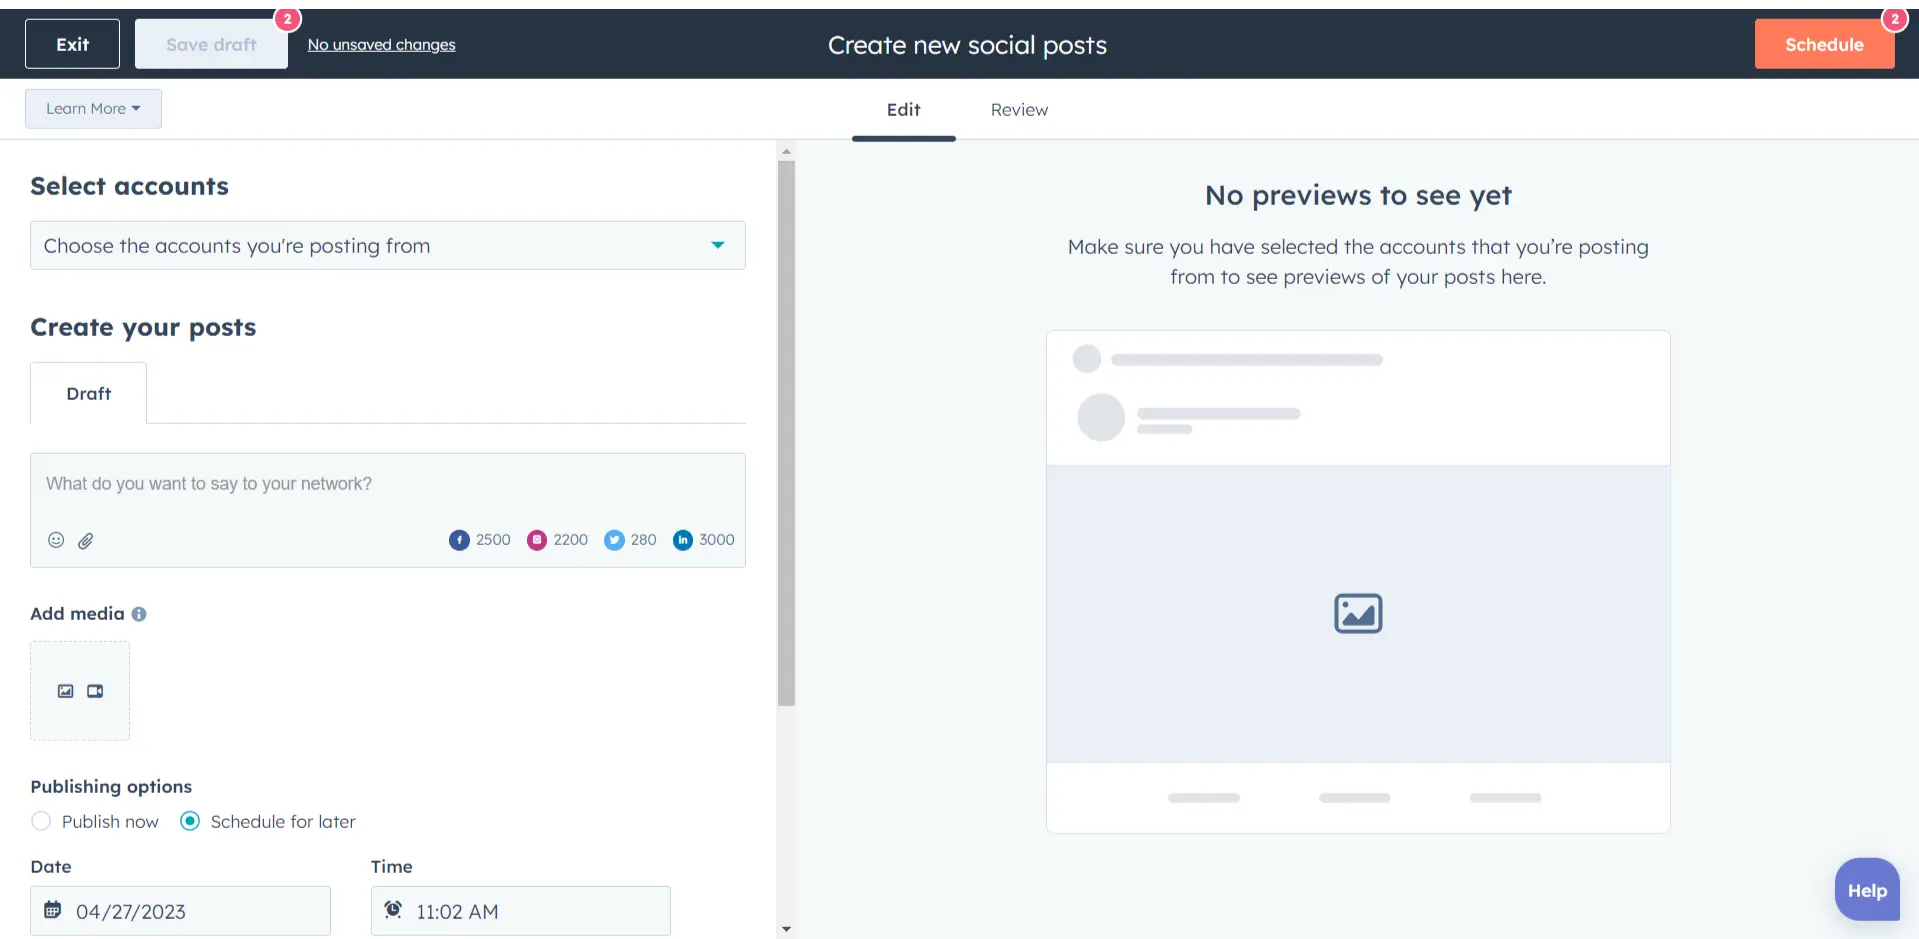 NEW FEATURE UPDATE] Create More Targeted Coupons with HubSpot